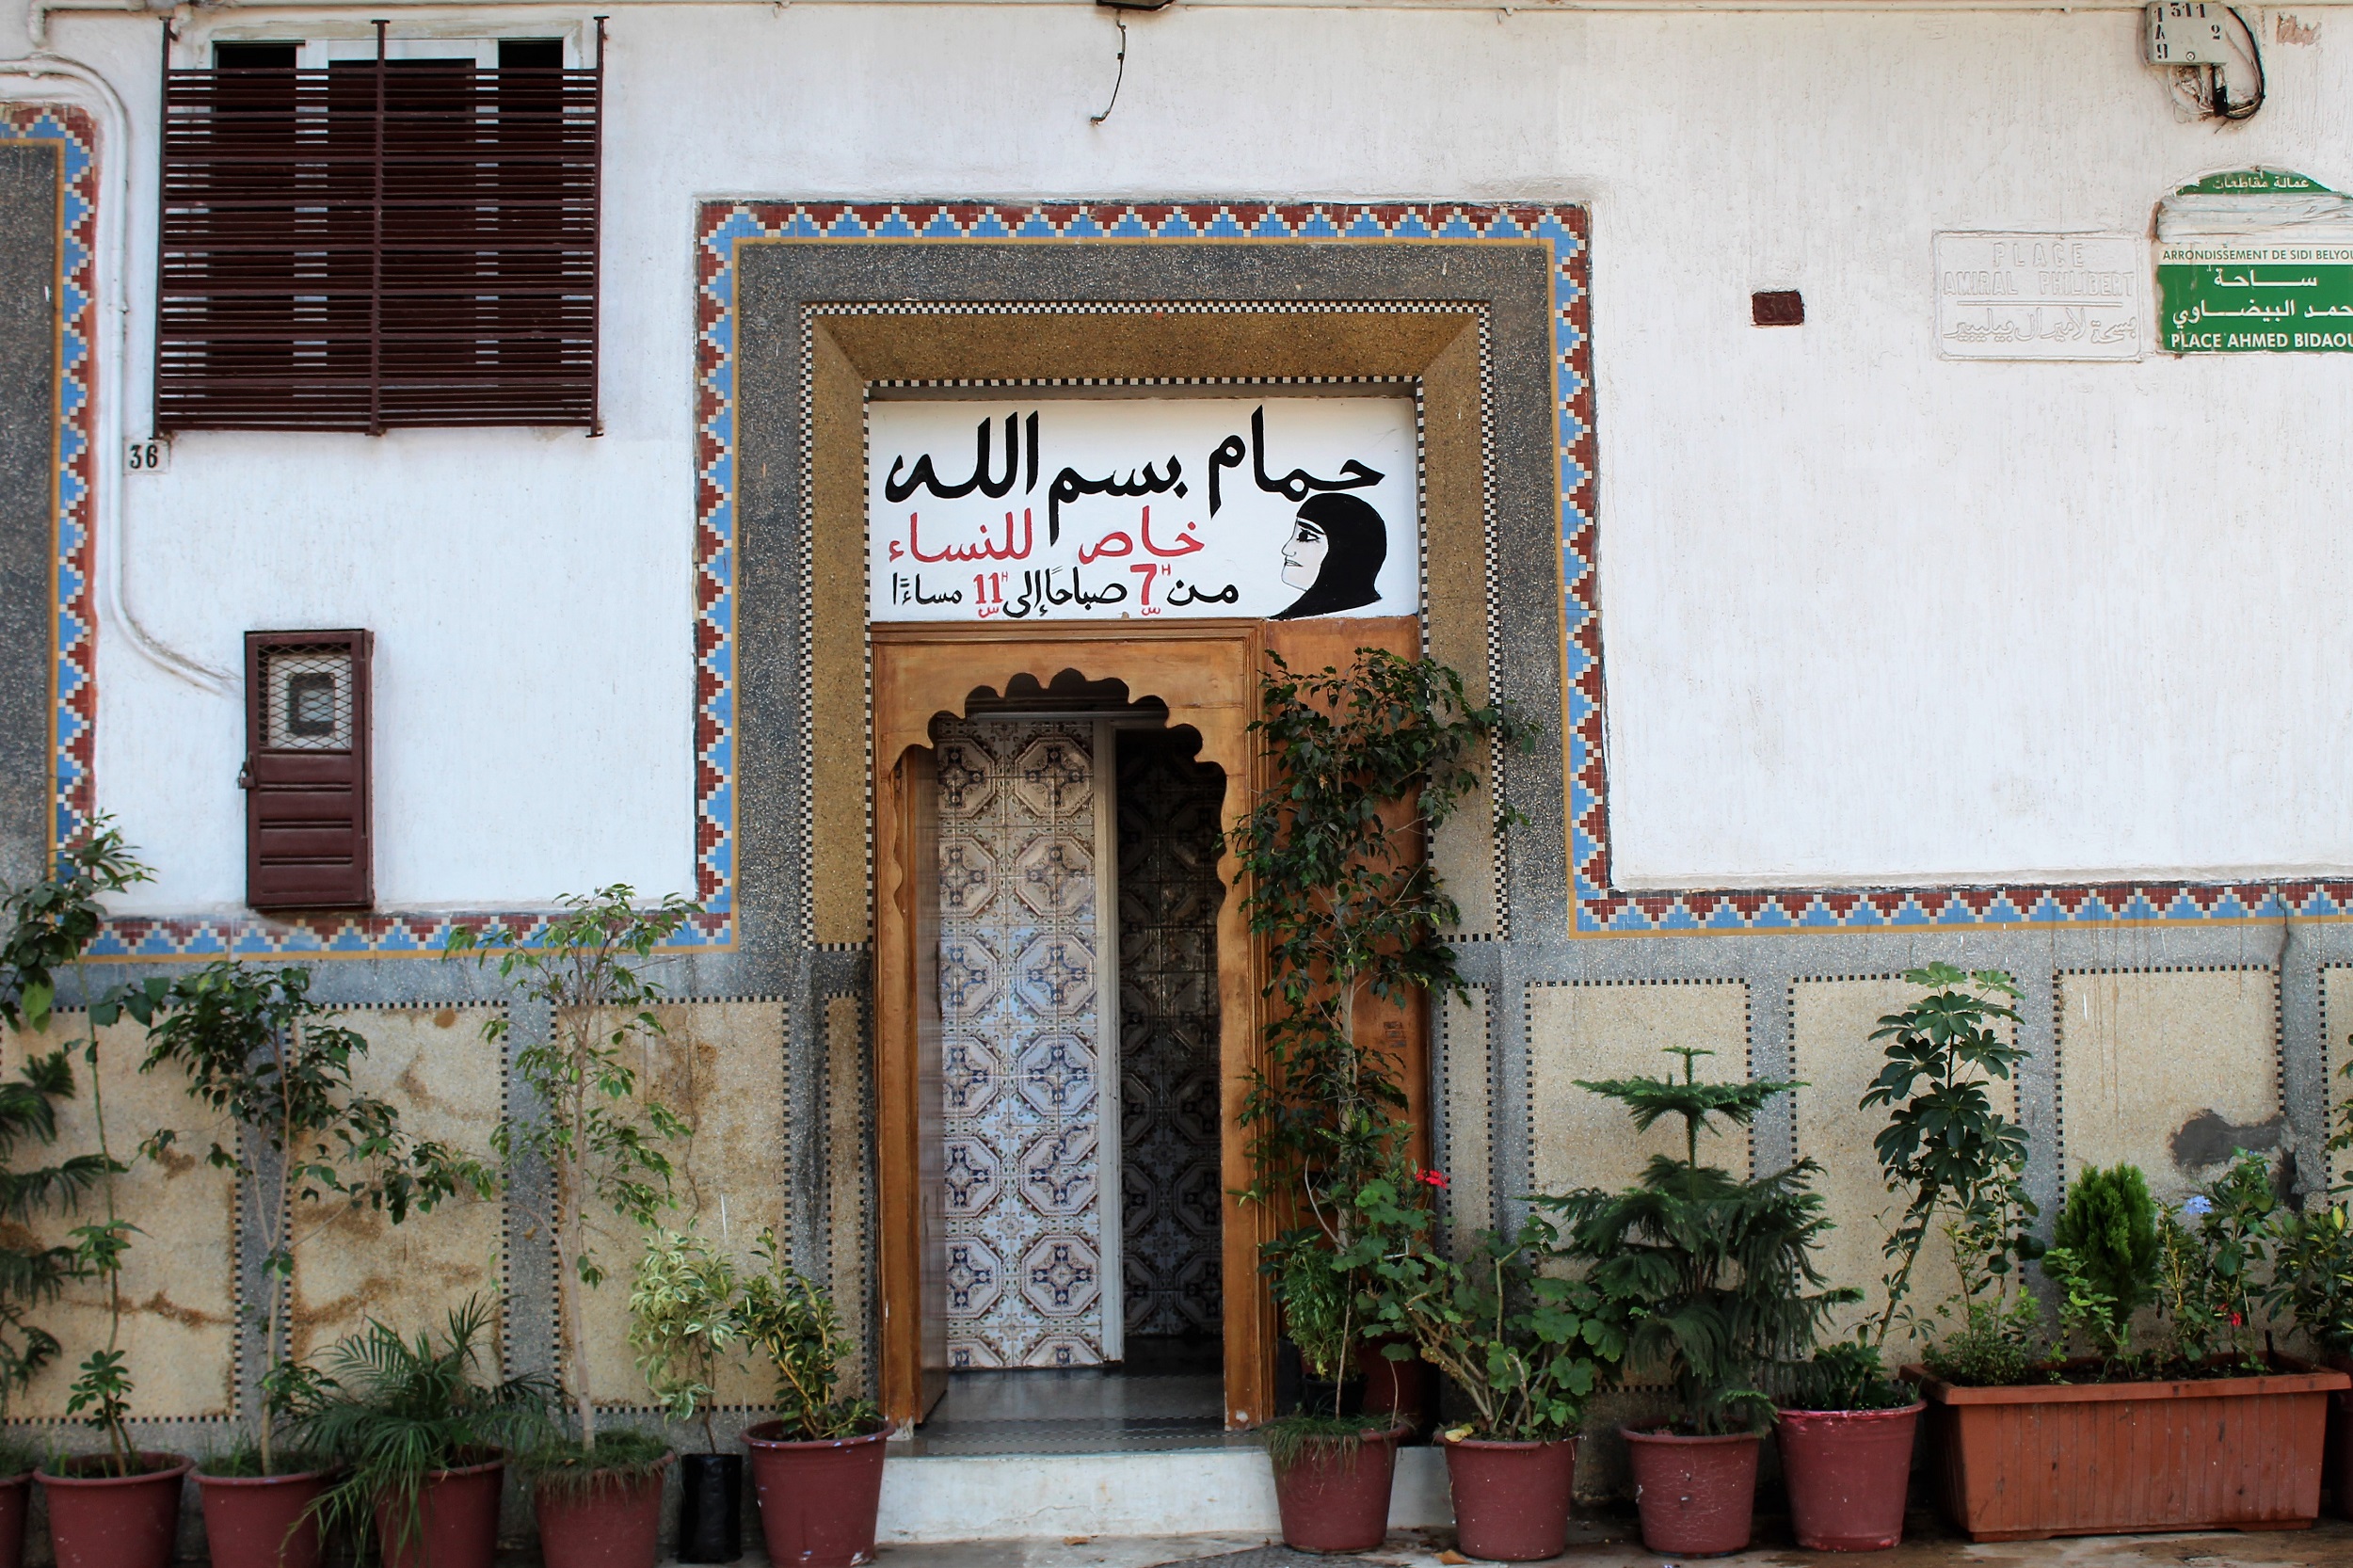 This photo shows the entrance to the women's hammam in Casablancas old medina